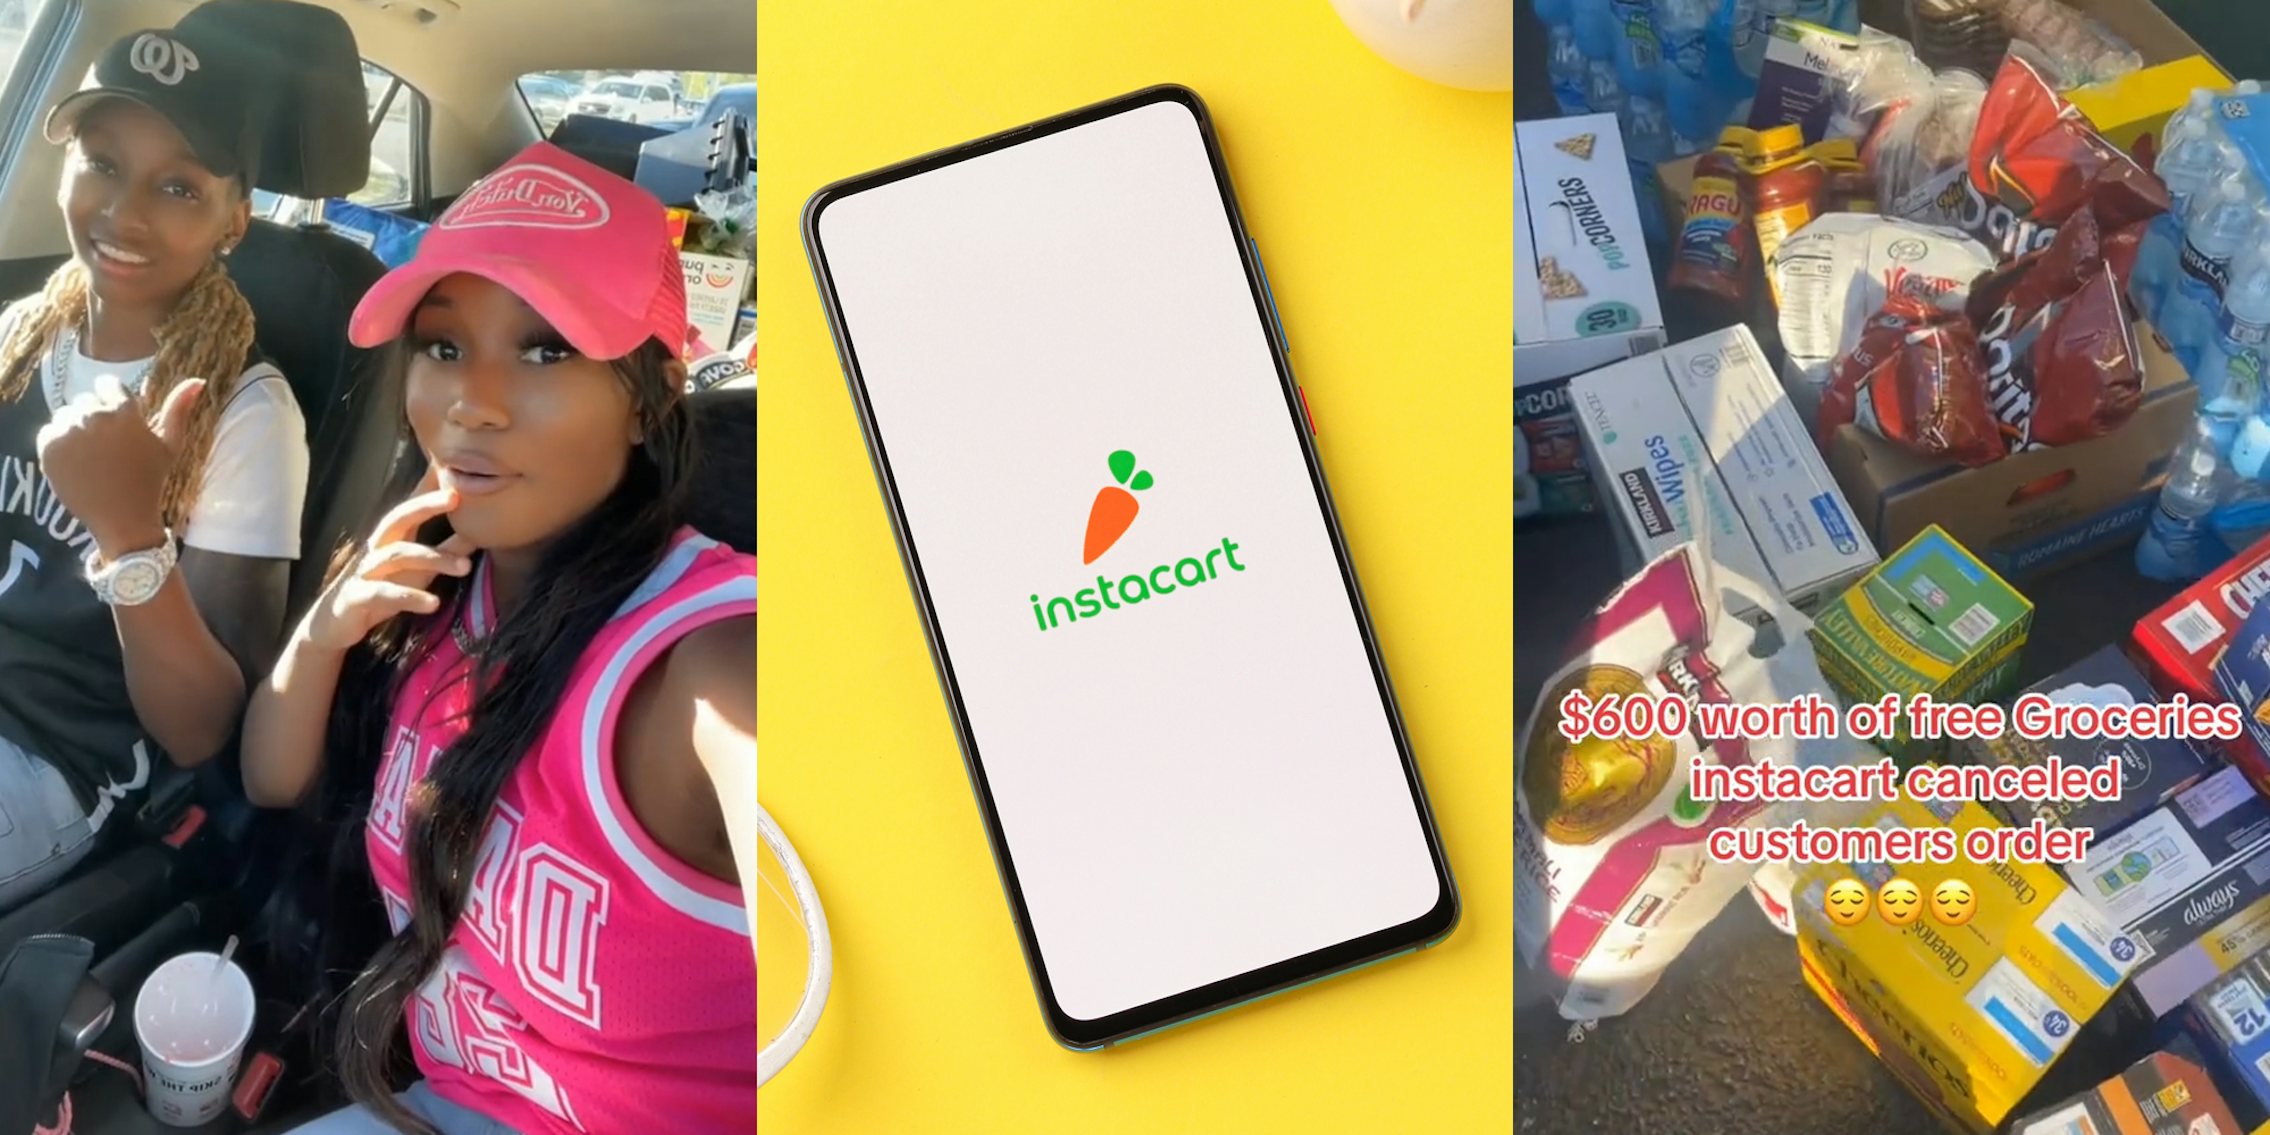 Instacart shoppers speaking in the car (l) Instacart app open on phone in front of yellow background (c) groceries outside with caption '$600 worth of free groceries instacart canceled customers order'